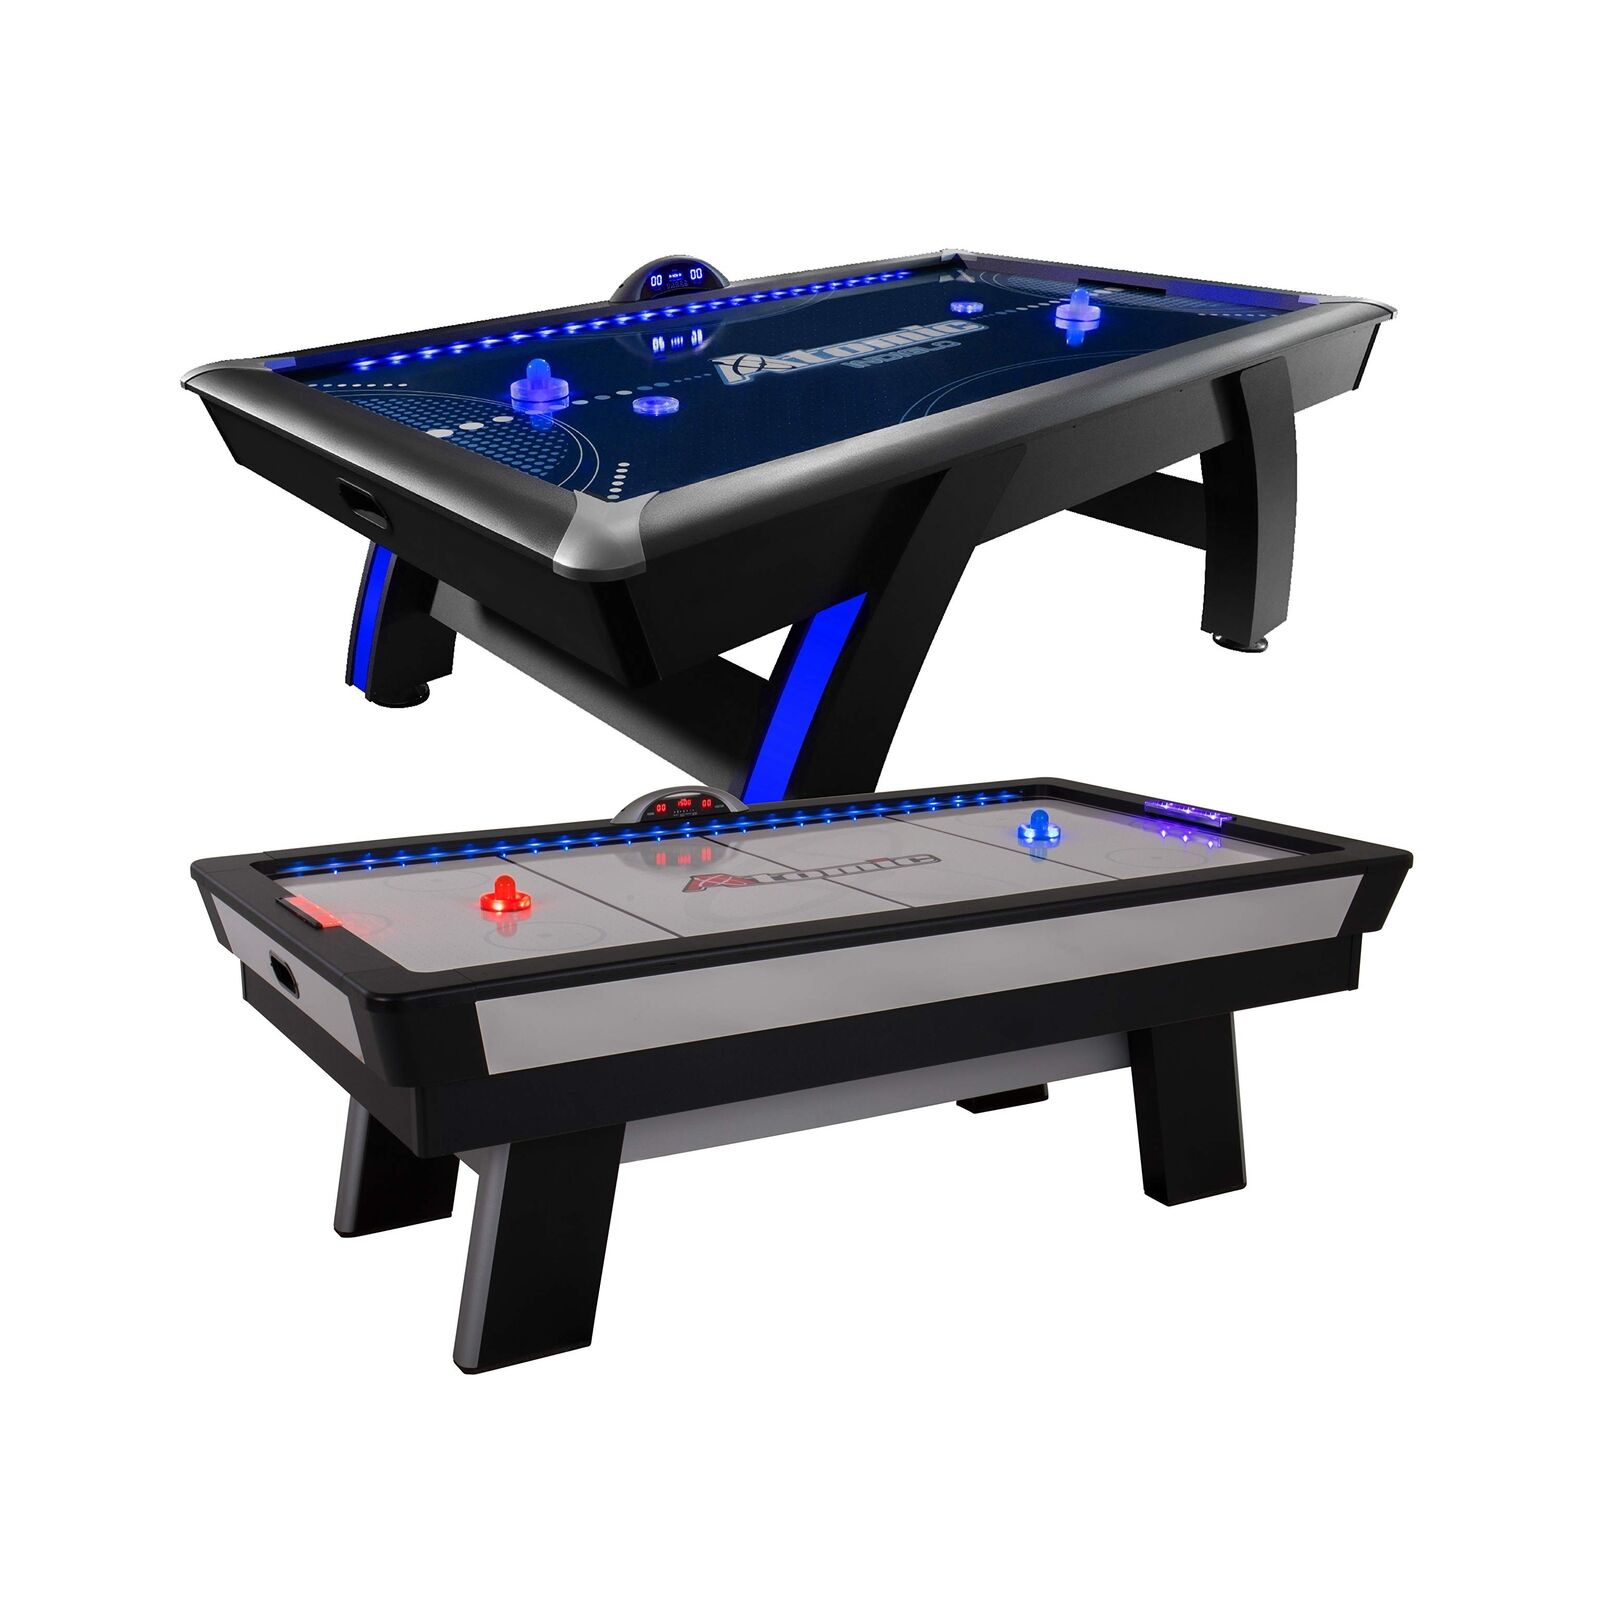 Black Atomic Top Shelf 7.5 Air Hockey Table and silver Atomic Top Shelf 7.5 Air Hockey Table